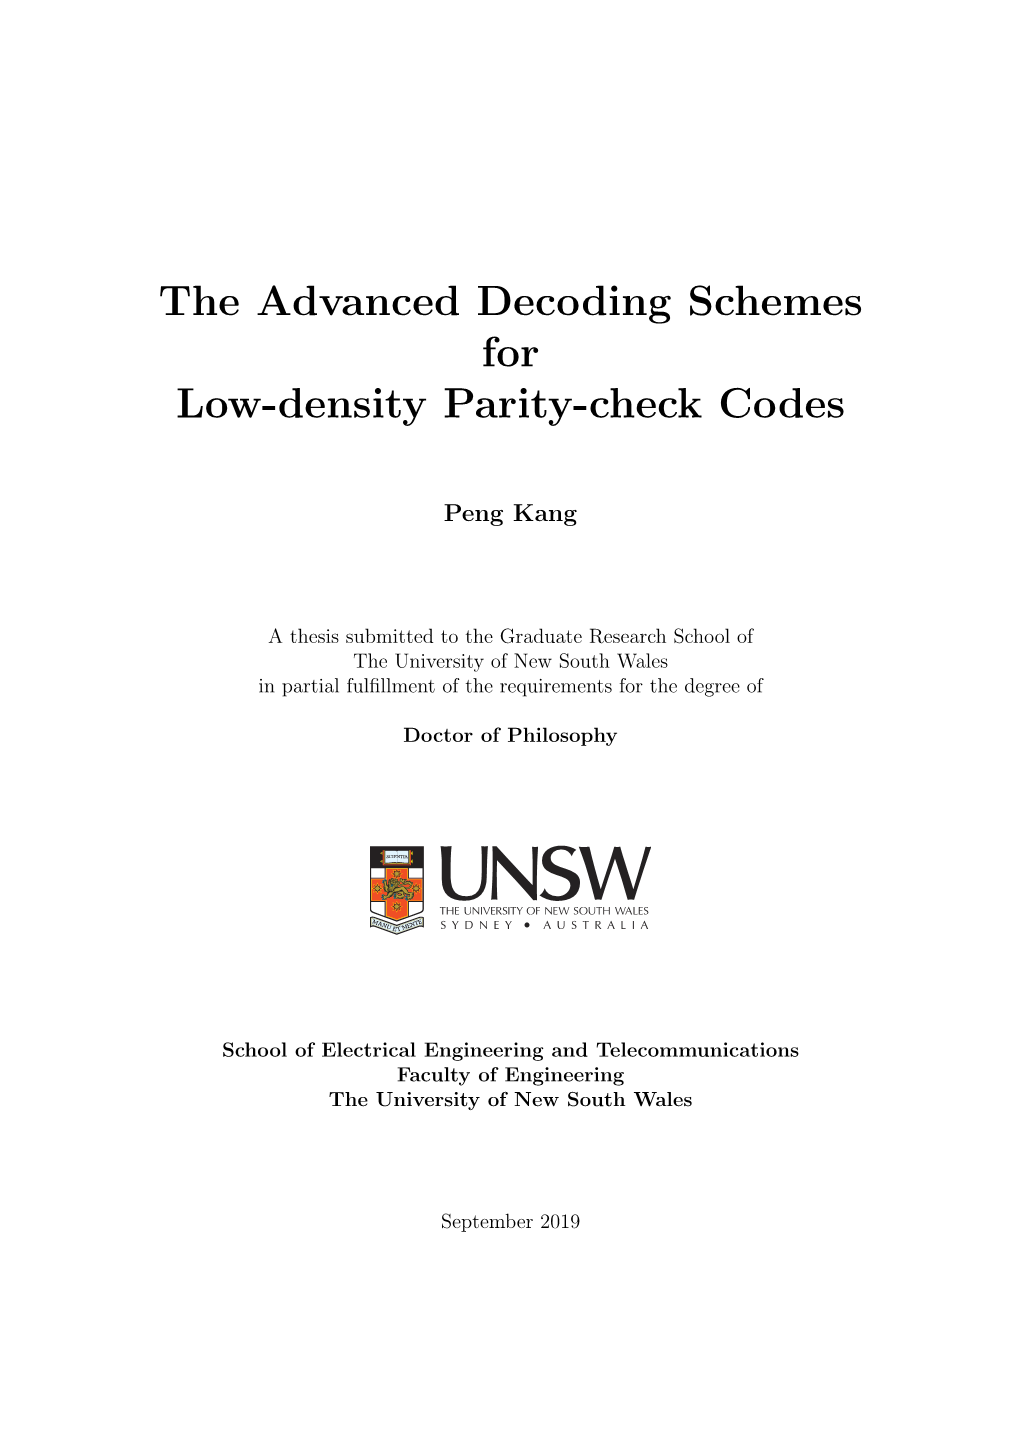 The Advanced Decoding Schemes for Low-Density Parity-Check Codes